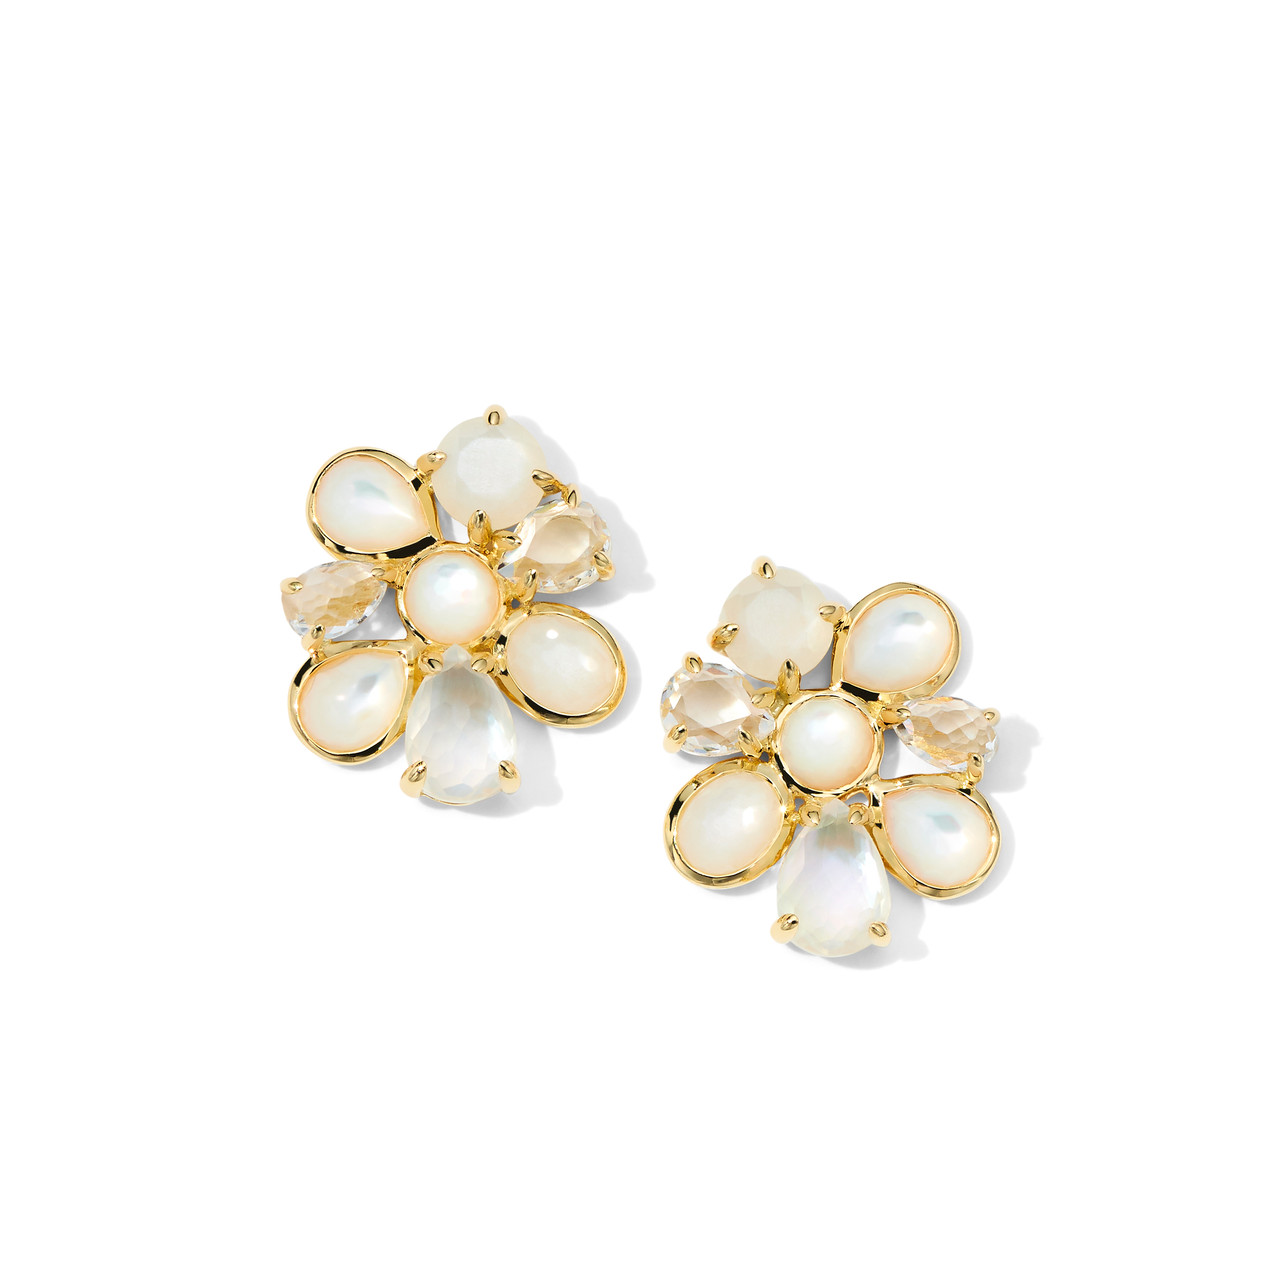 Small 8-Stone Cluster Earrings in 18K Gold